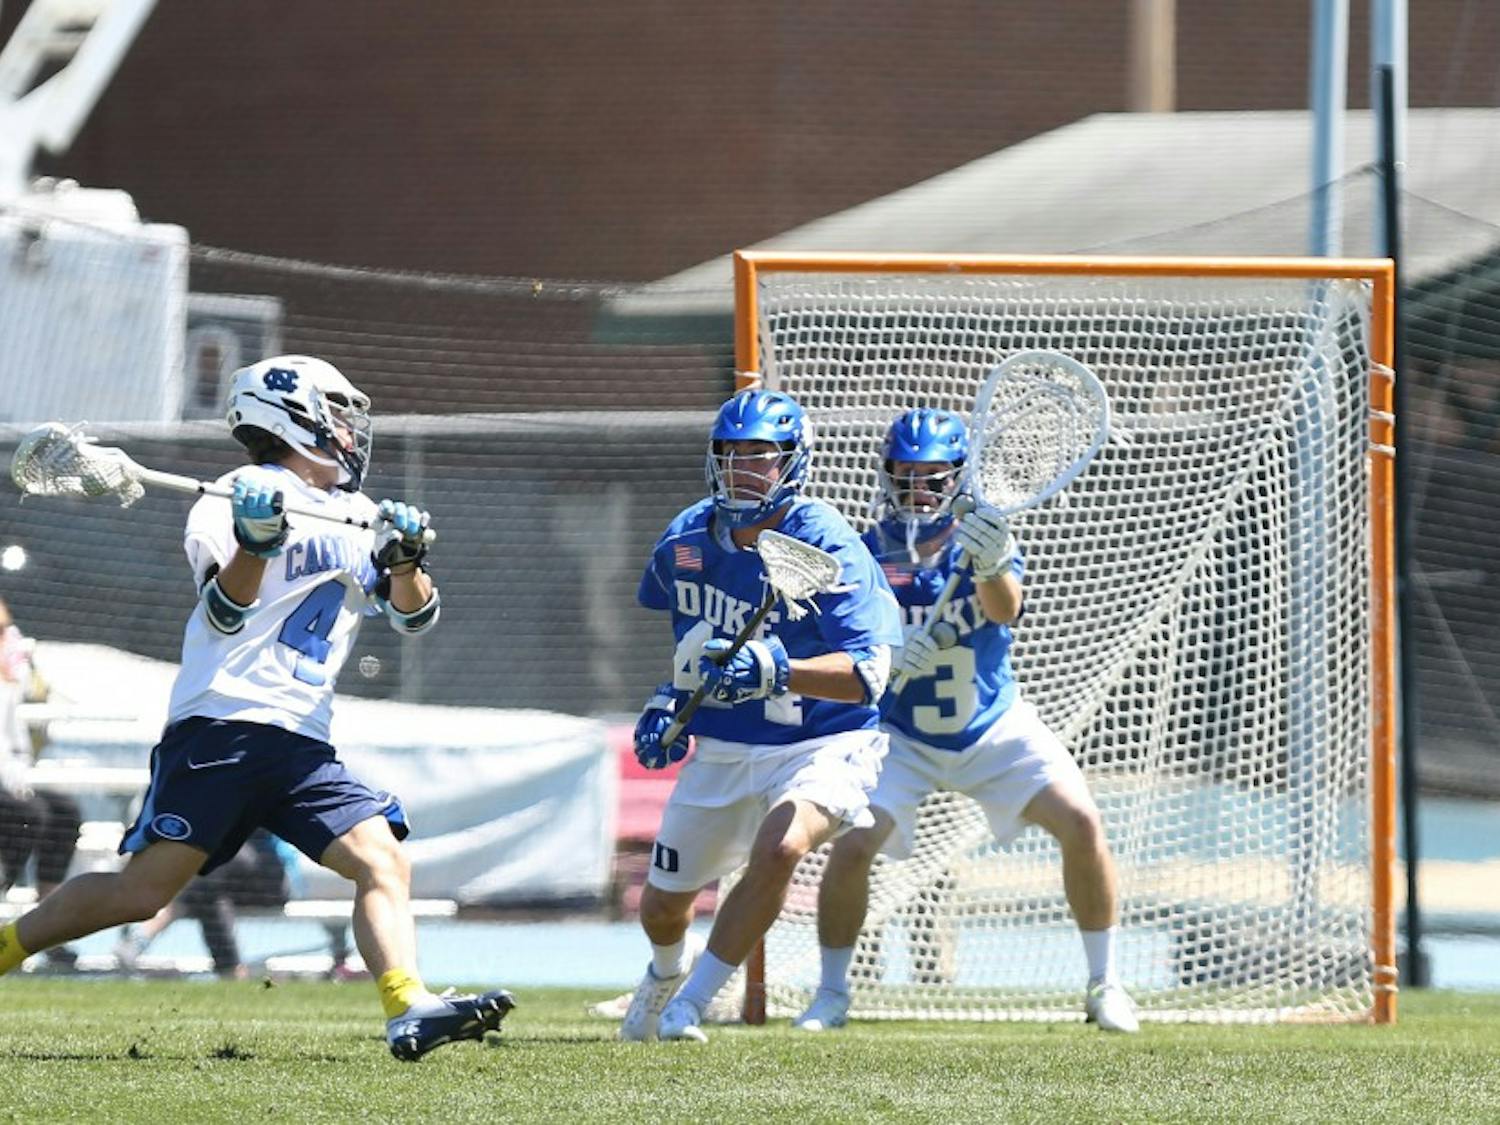 Redshirt freshman Danny Fowler made 13 saves for the Blue Devils in Sunday's 15-14 loss at North Carolina.